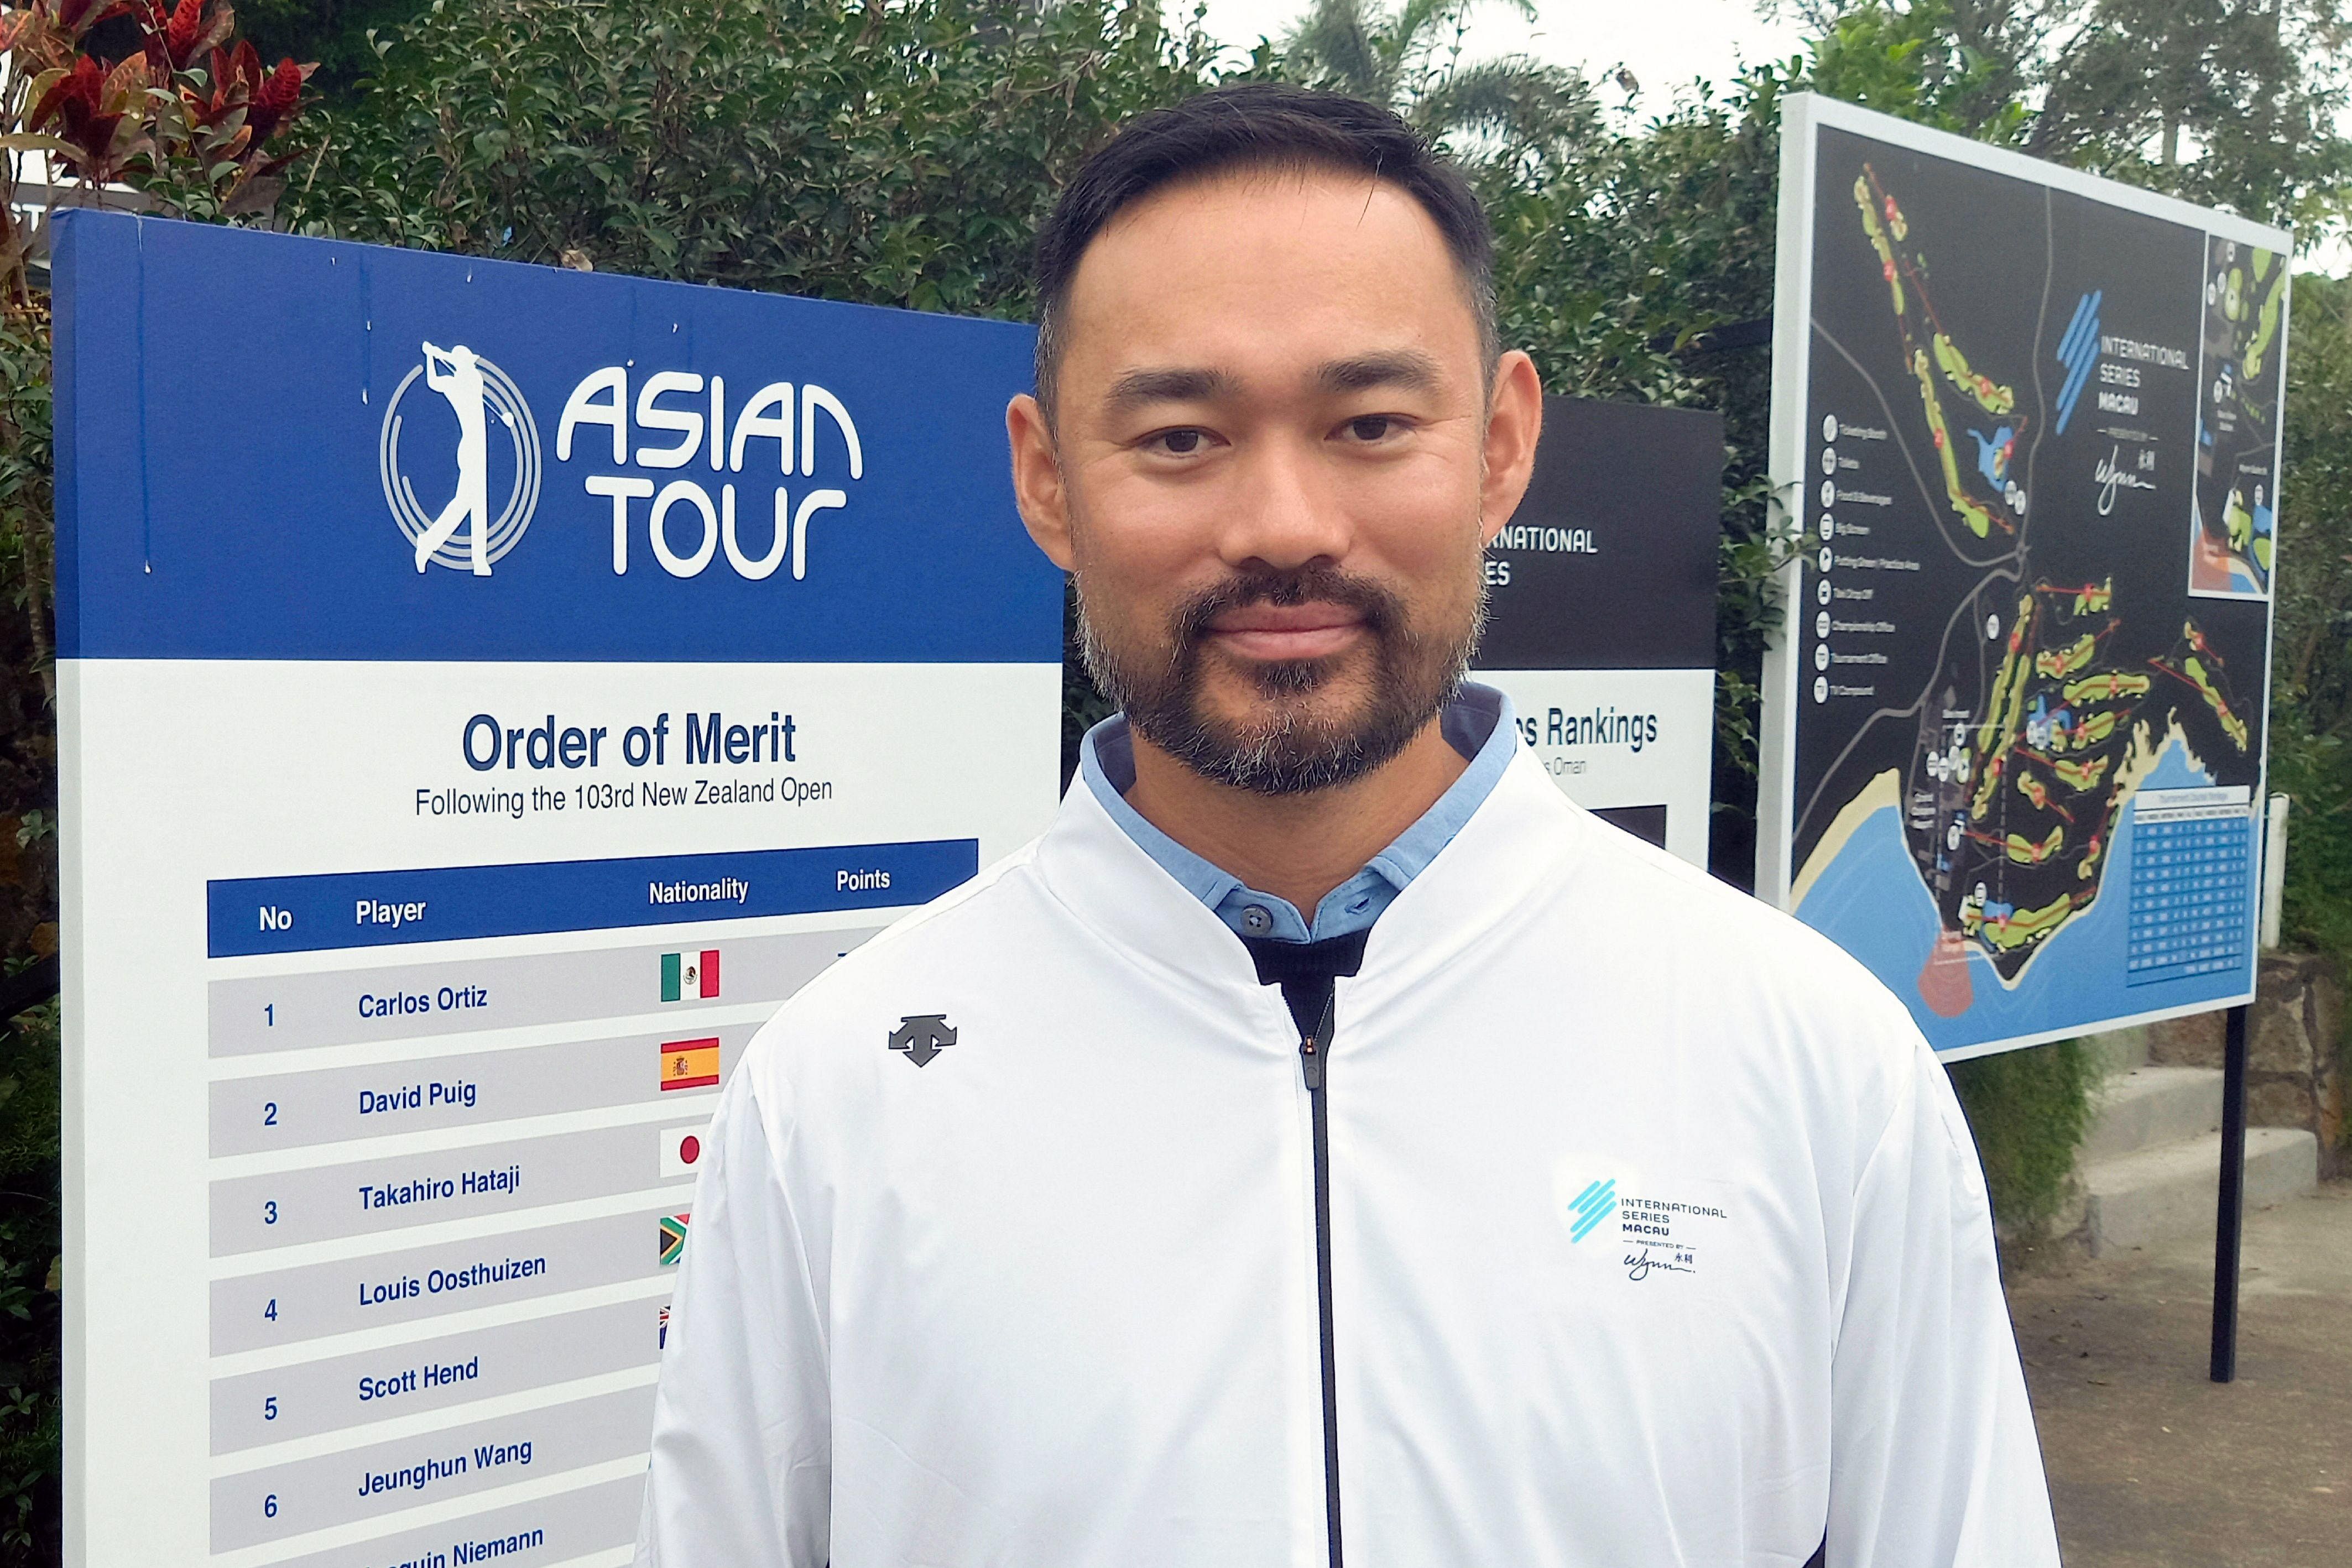 Asian Tour remains an option for LIV golfers looking for ranking points